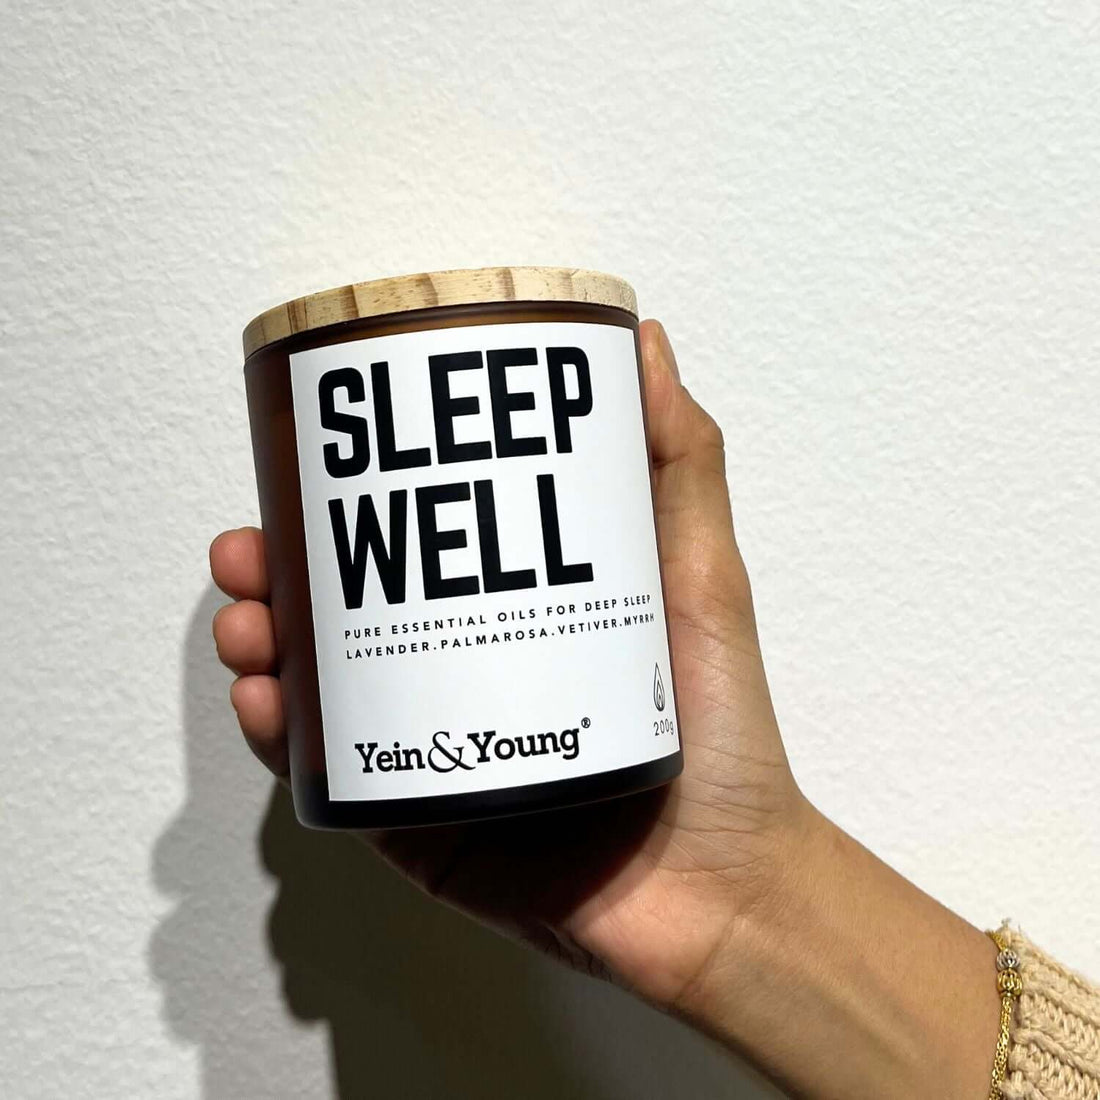 Introducing Our Latest Addition: The Candle Designed to Improve Your Sleep Quality!